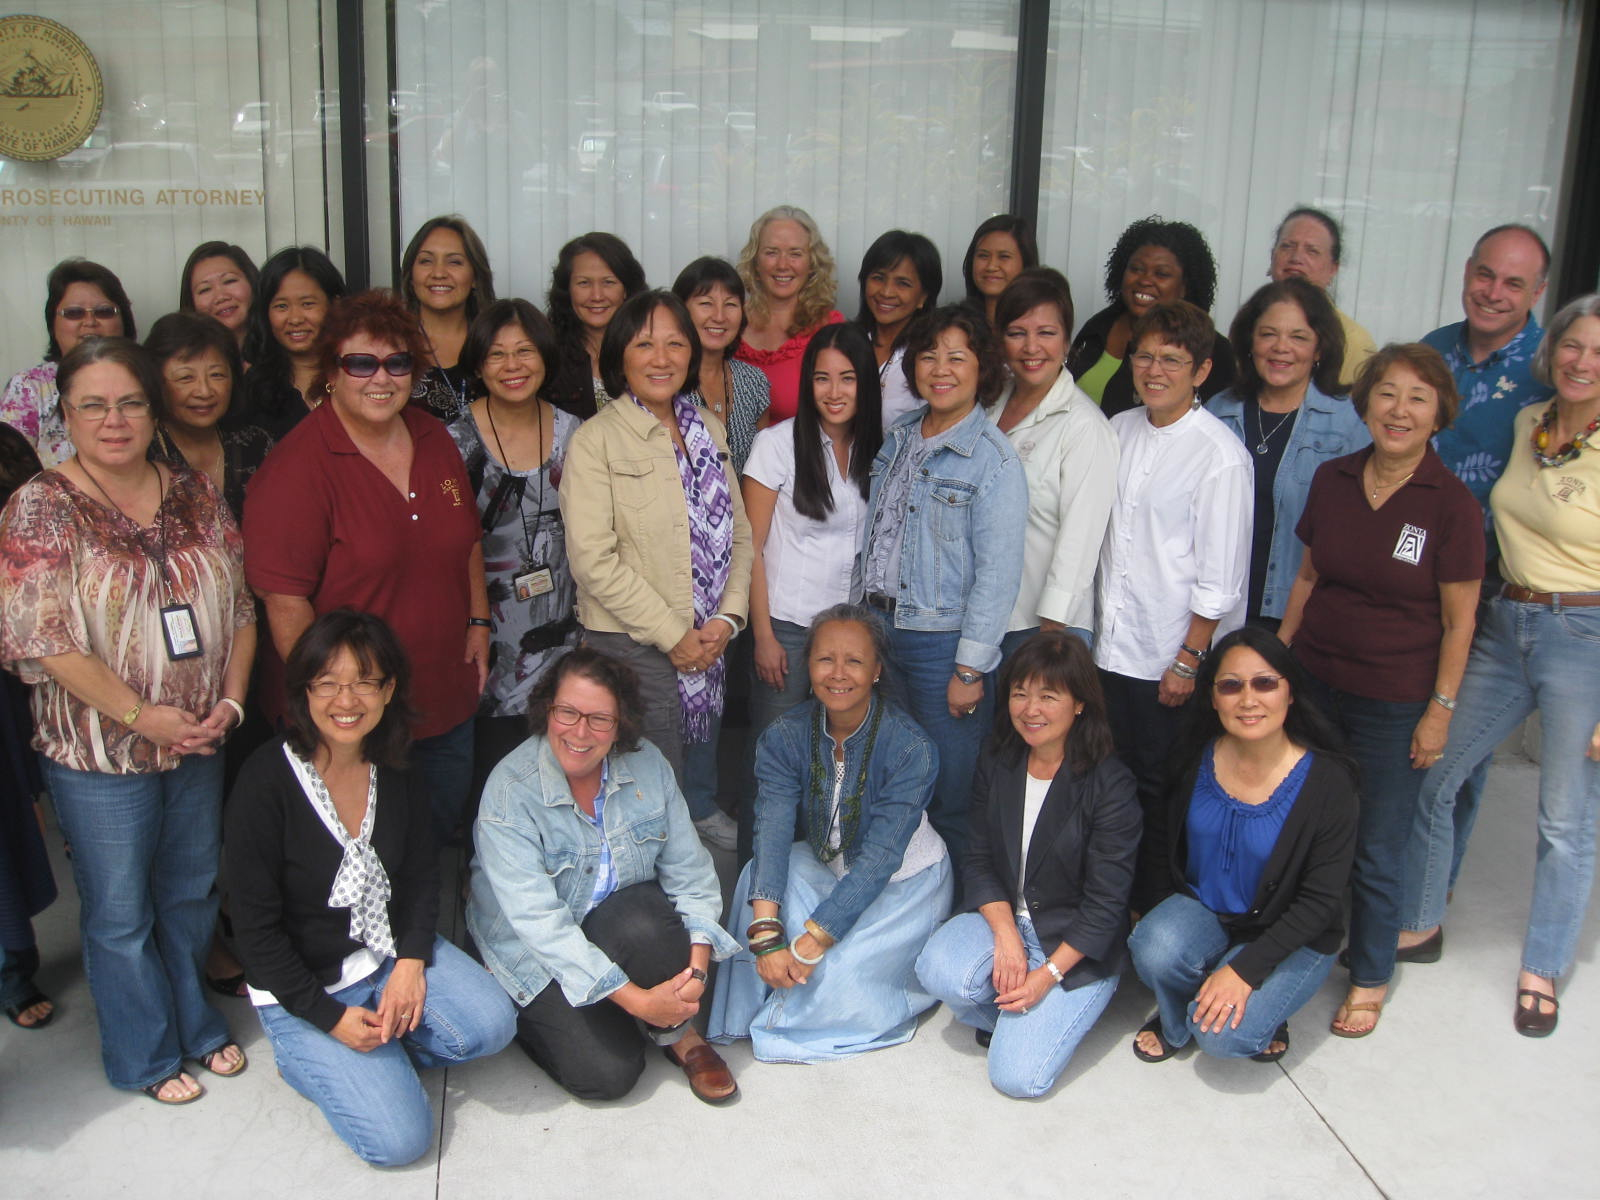 Denim Day brings Zonta Club together with Prosecutor’s office